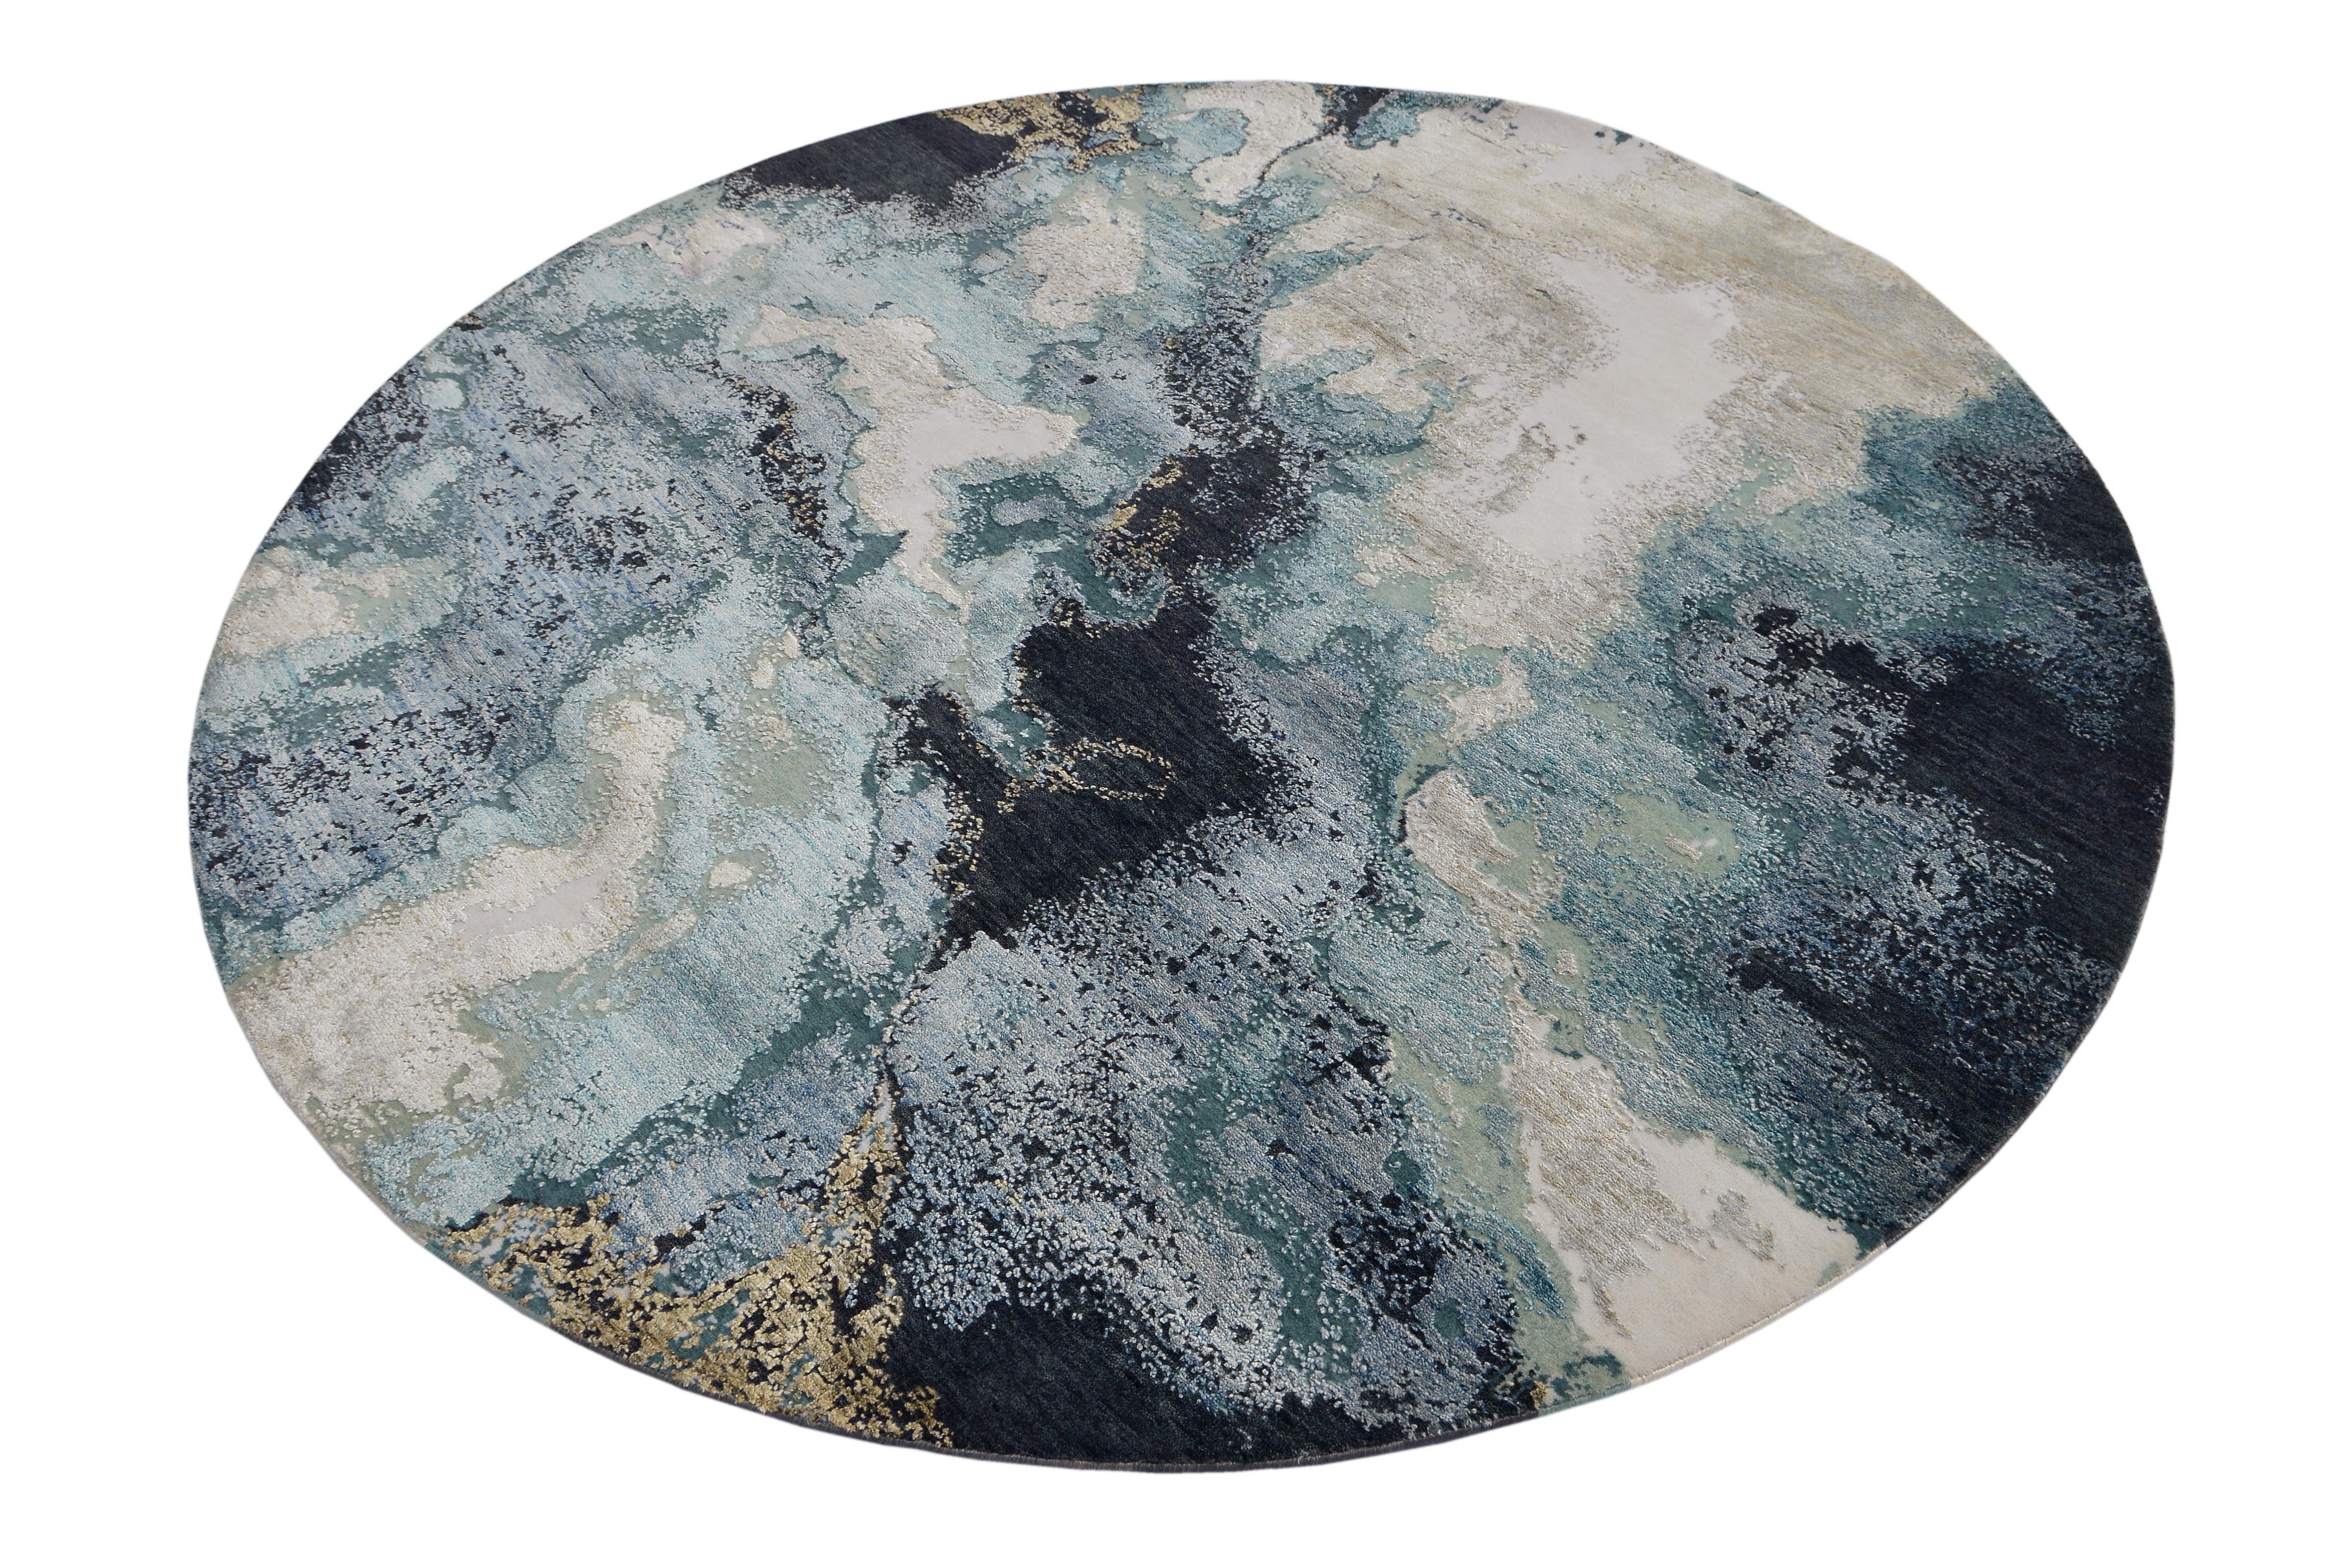 A new addition to the handmade rugs in the abstract rug line by Rug & Kilim, this 6'5” x 6'5” modern circle rug is hand knotted in a unique, proprietary blend of quality wool and silk, the natural luster of the latter bringing out modern hues of